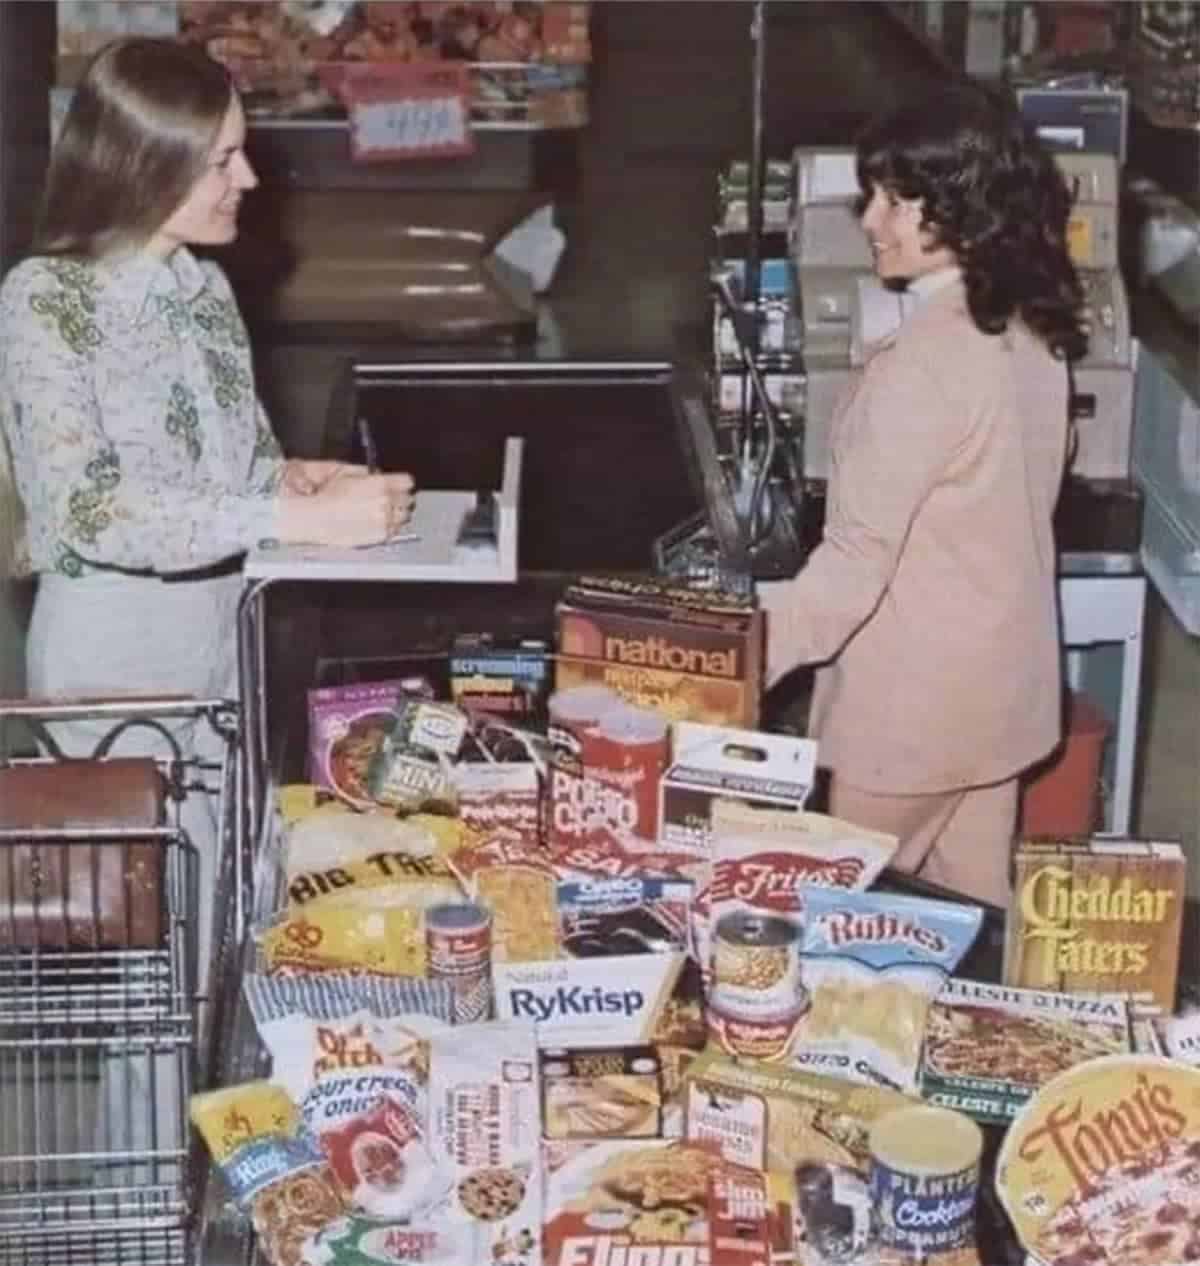 Paying for Groceries with a Check in the 1970s